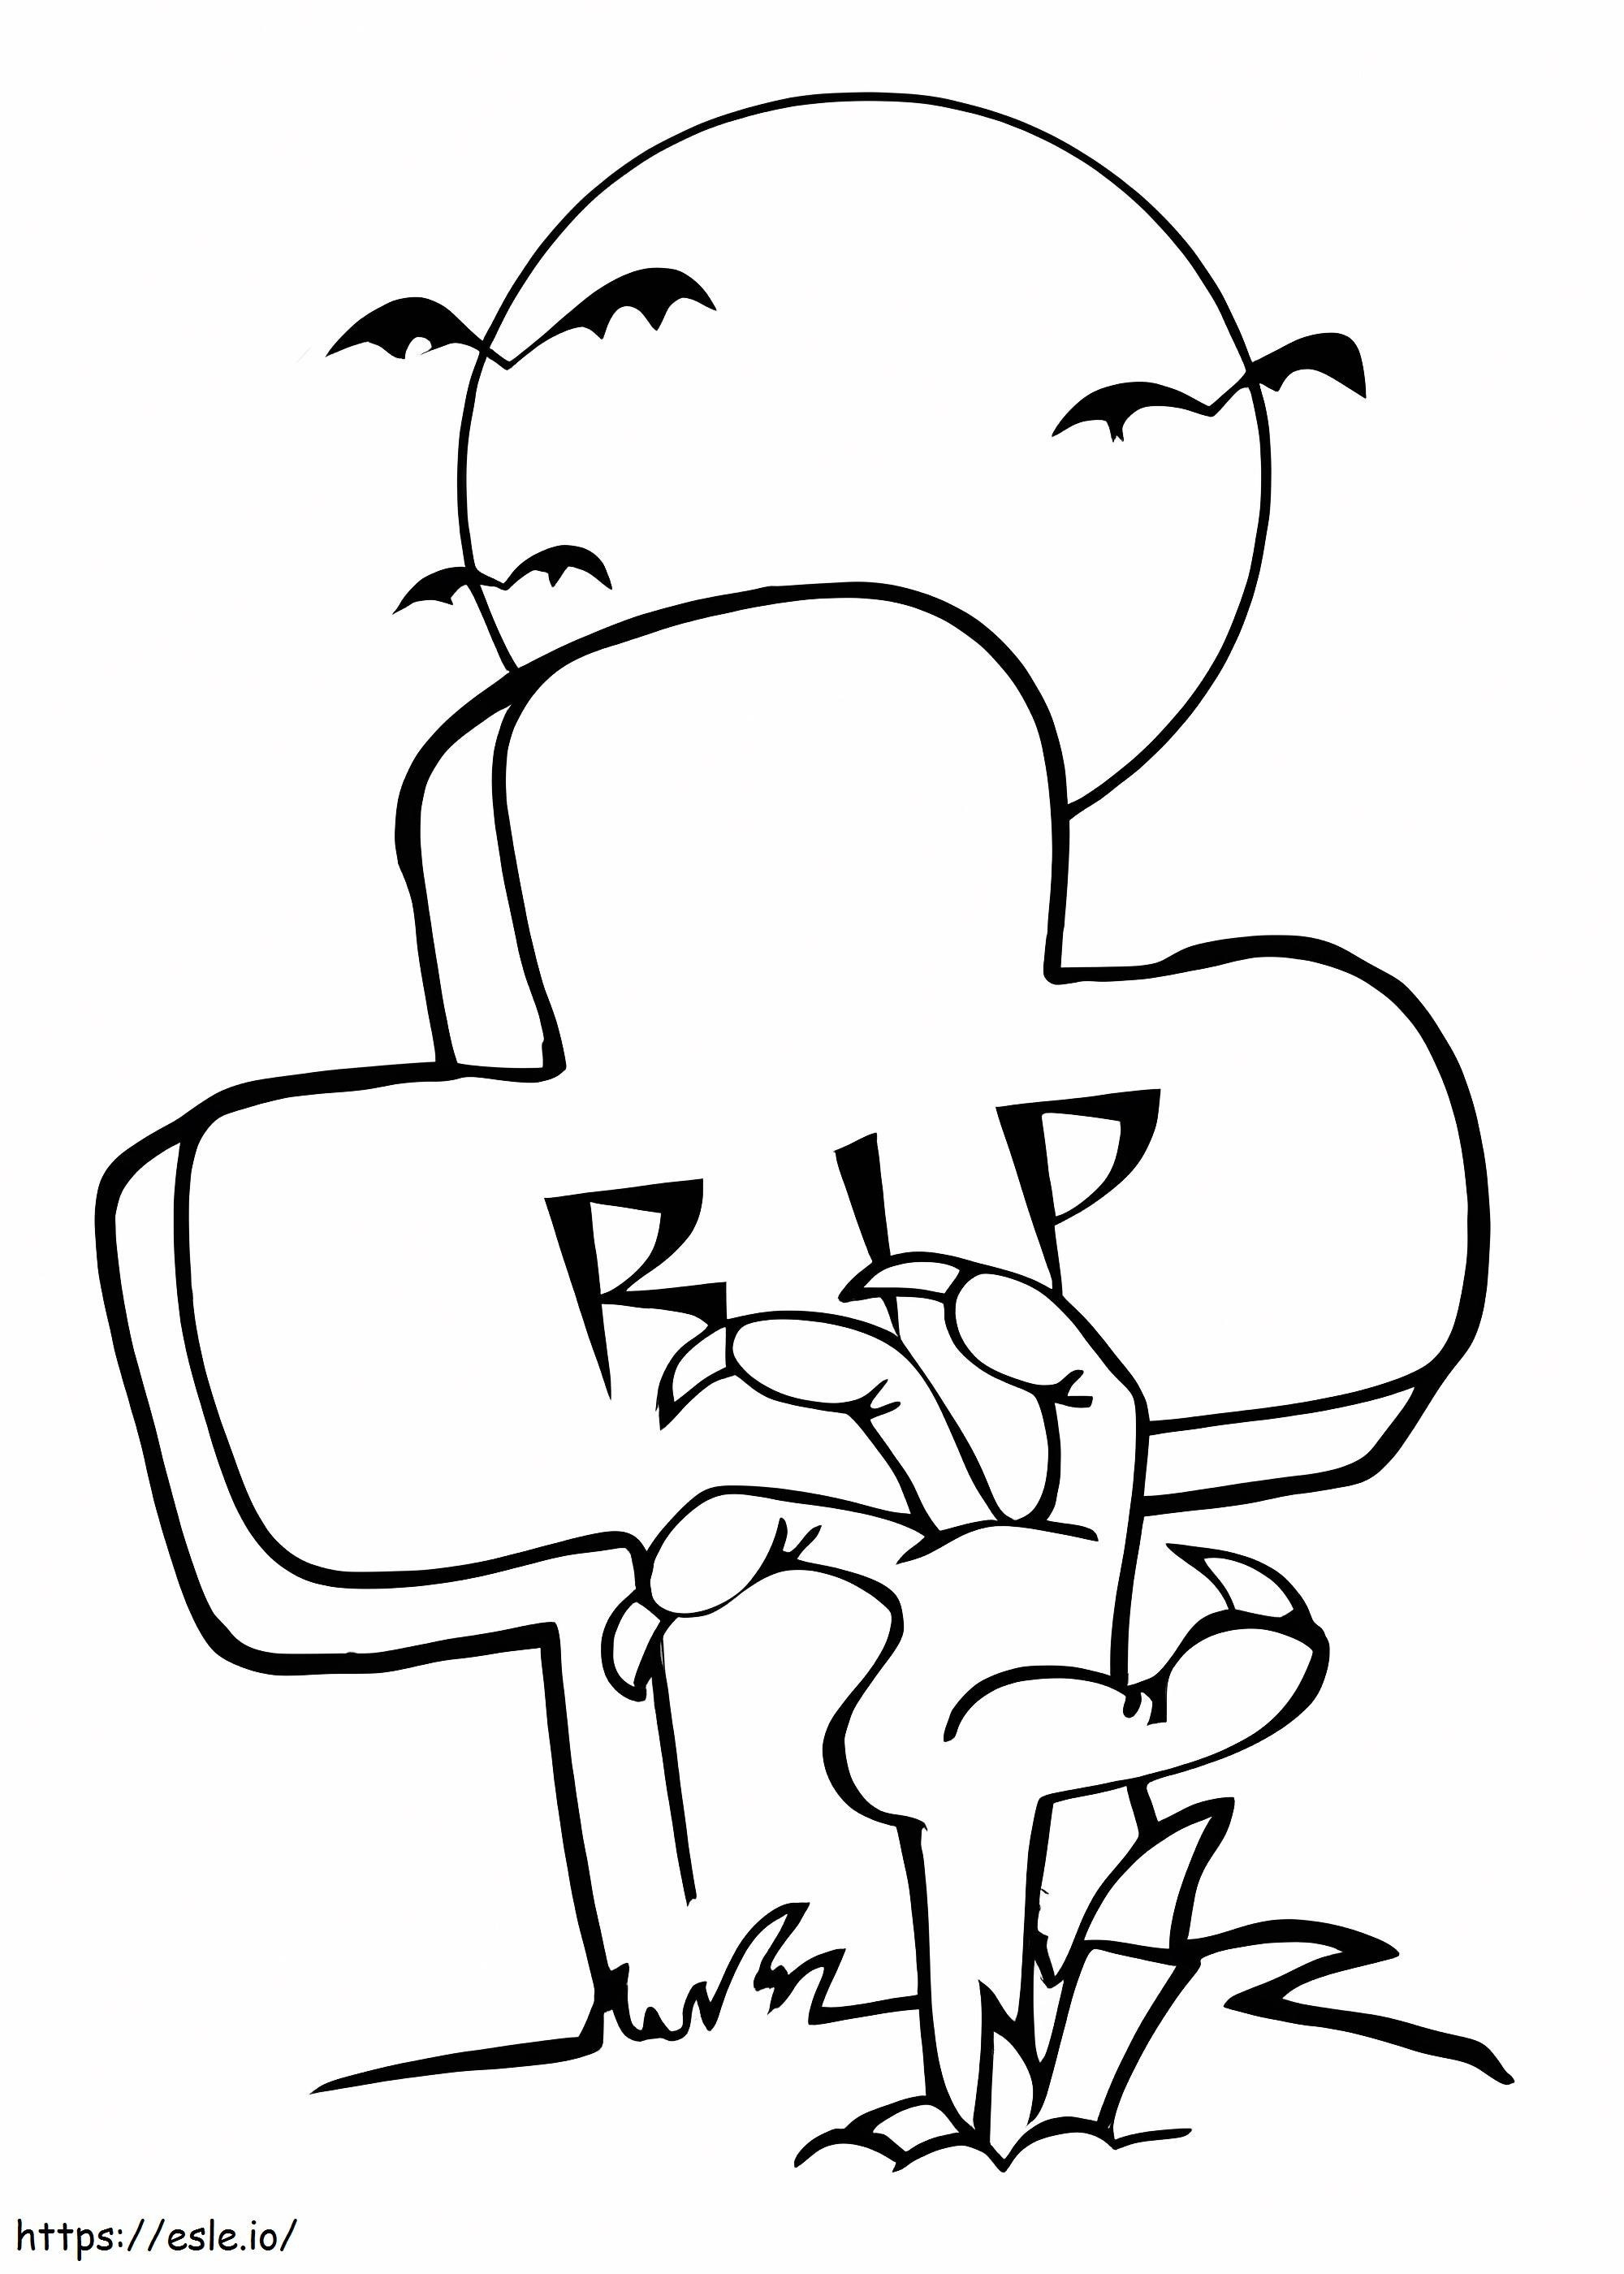 Tombstone 5 coloring page